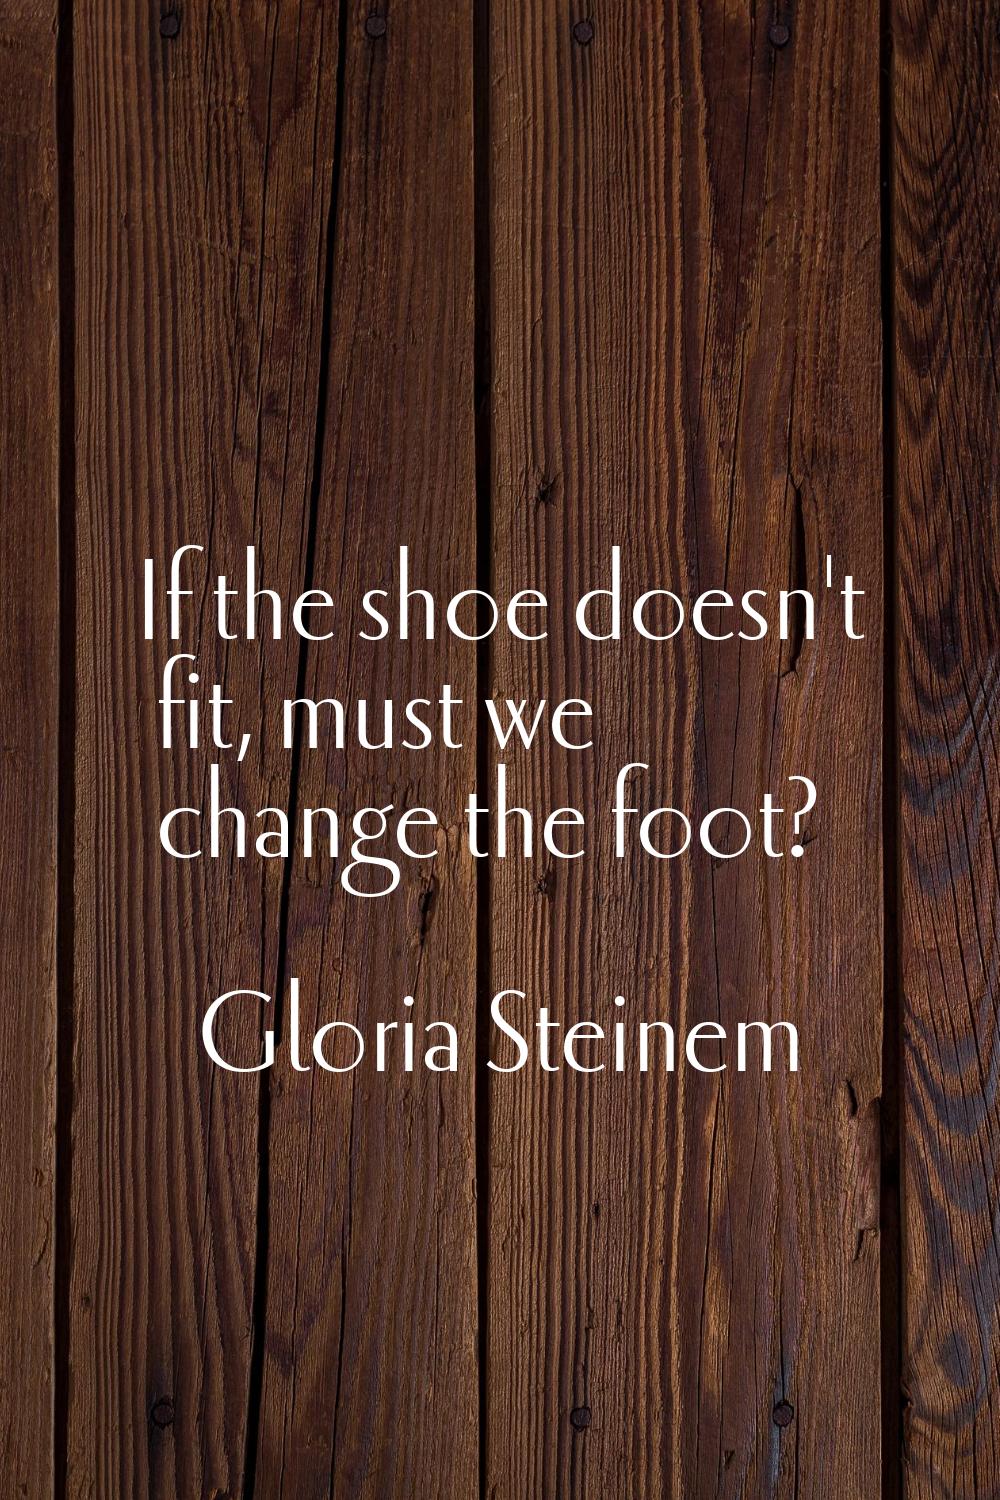 If the shoe doesn't fit, must we change the foot?